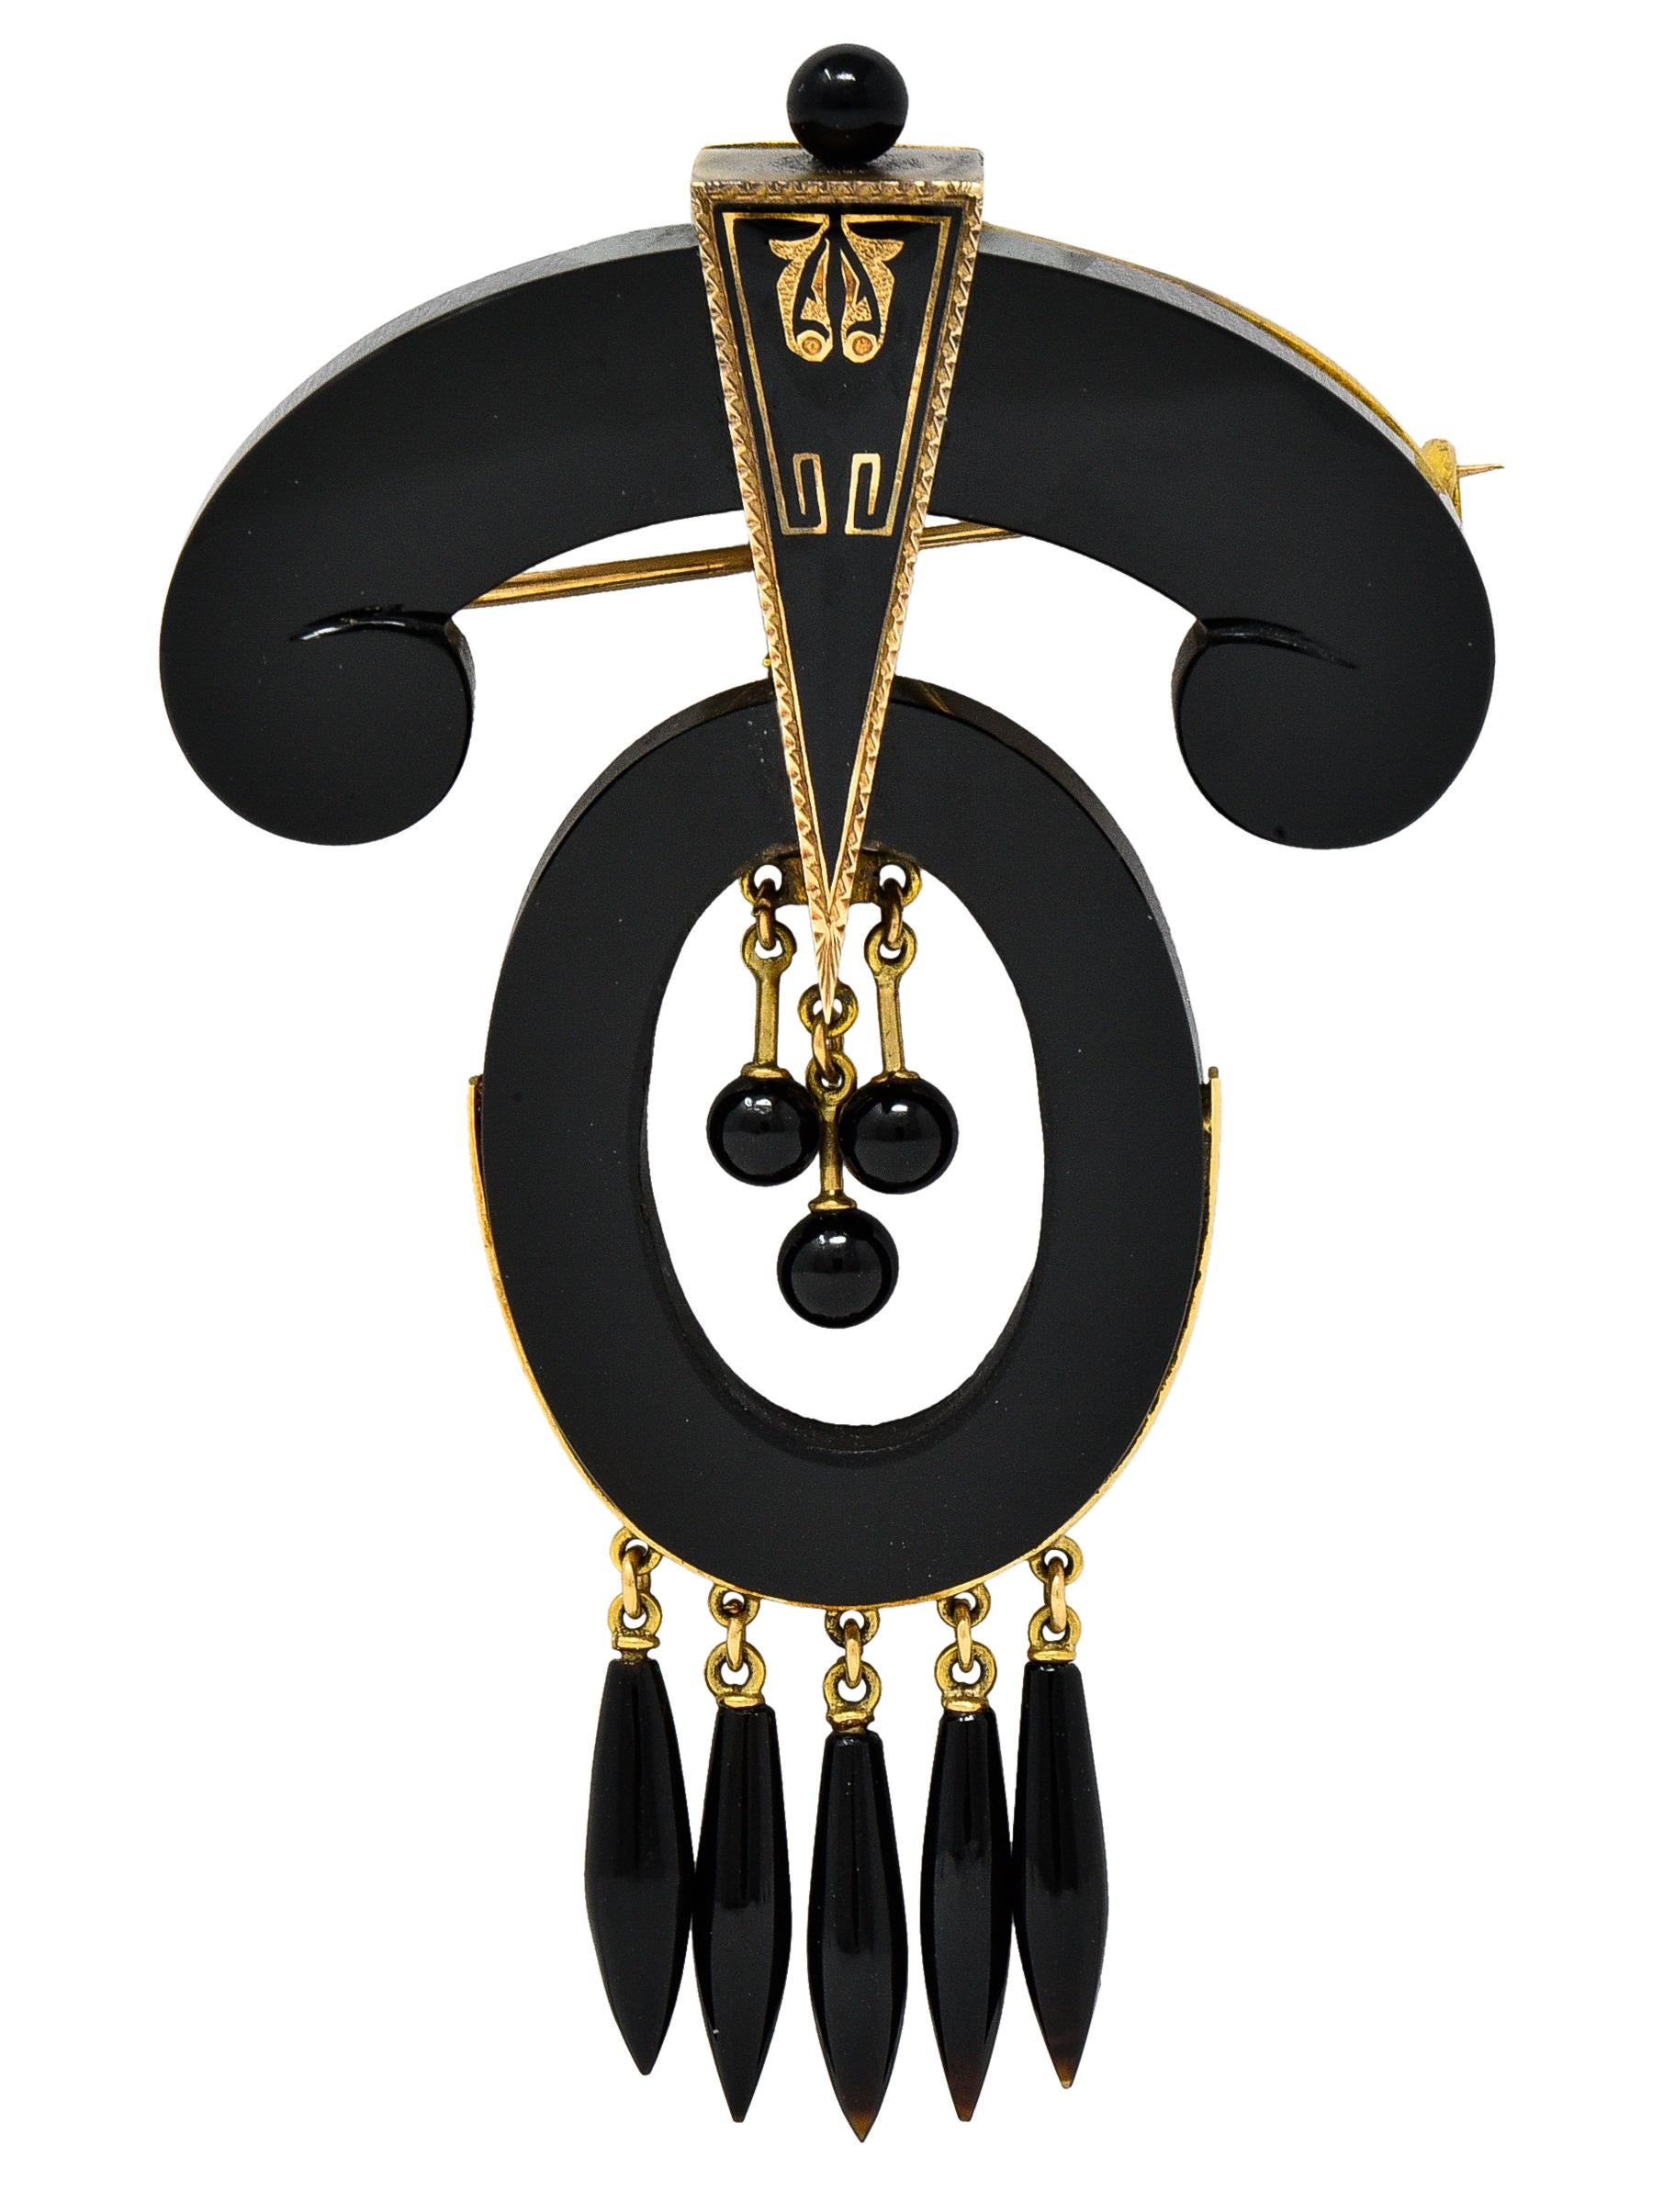 Matching set consists of a pair of earrings and a pendant brooch featuring carved onyx components. Including oval disks, a whiplash form, round beads, and spiculum beads - opaque glossy black. Earrings suspend oval disks from round bead surmounts;